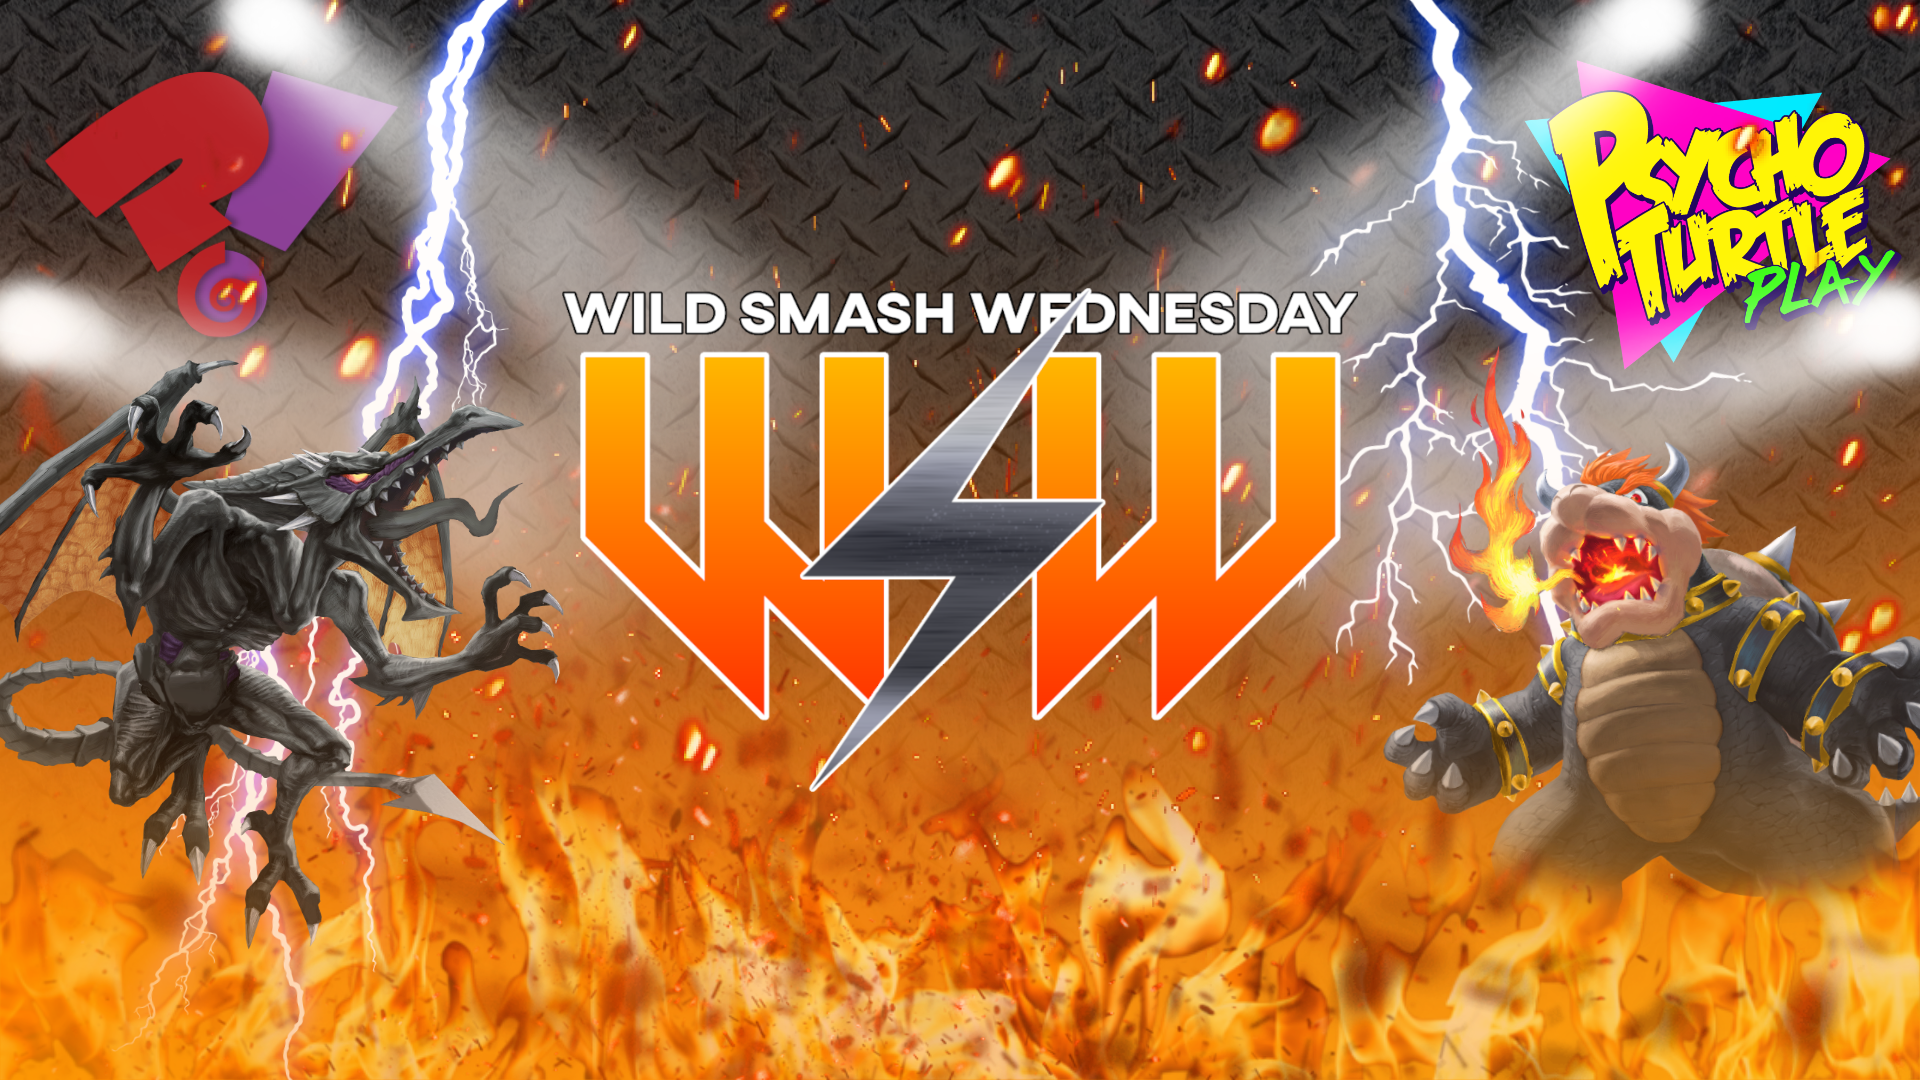 denise romano recommends What Is Wild Smash